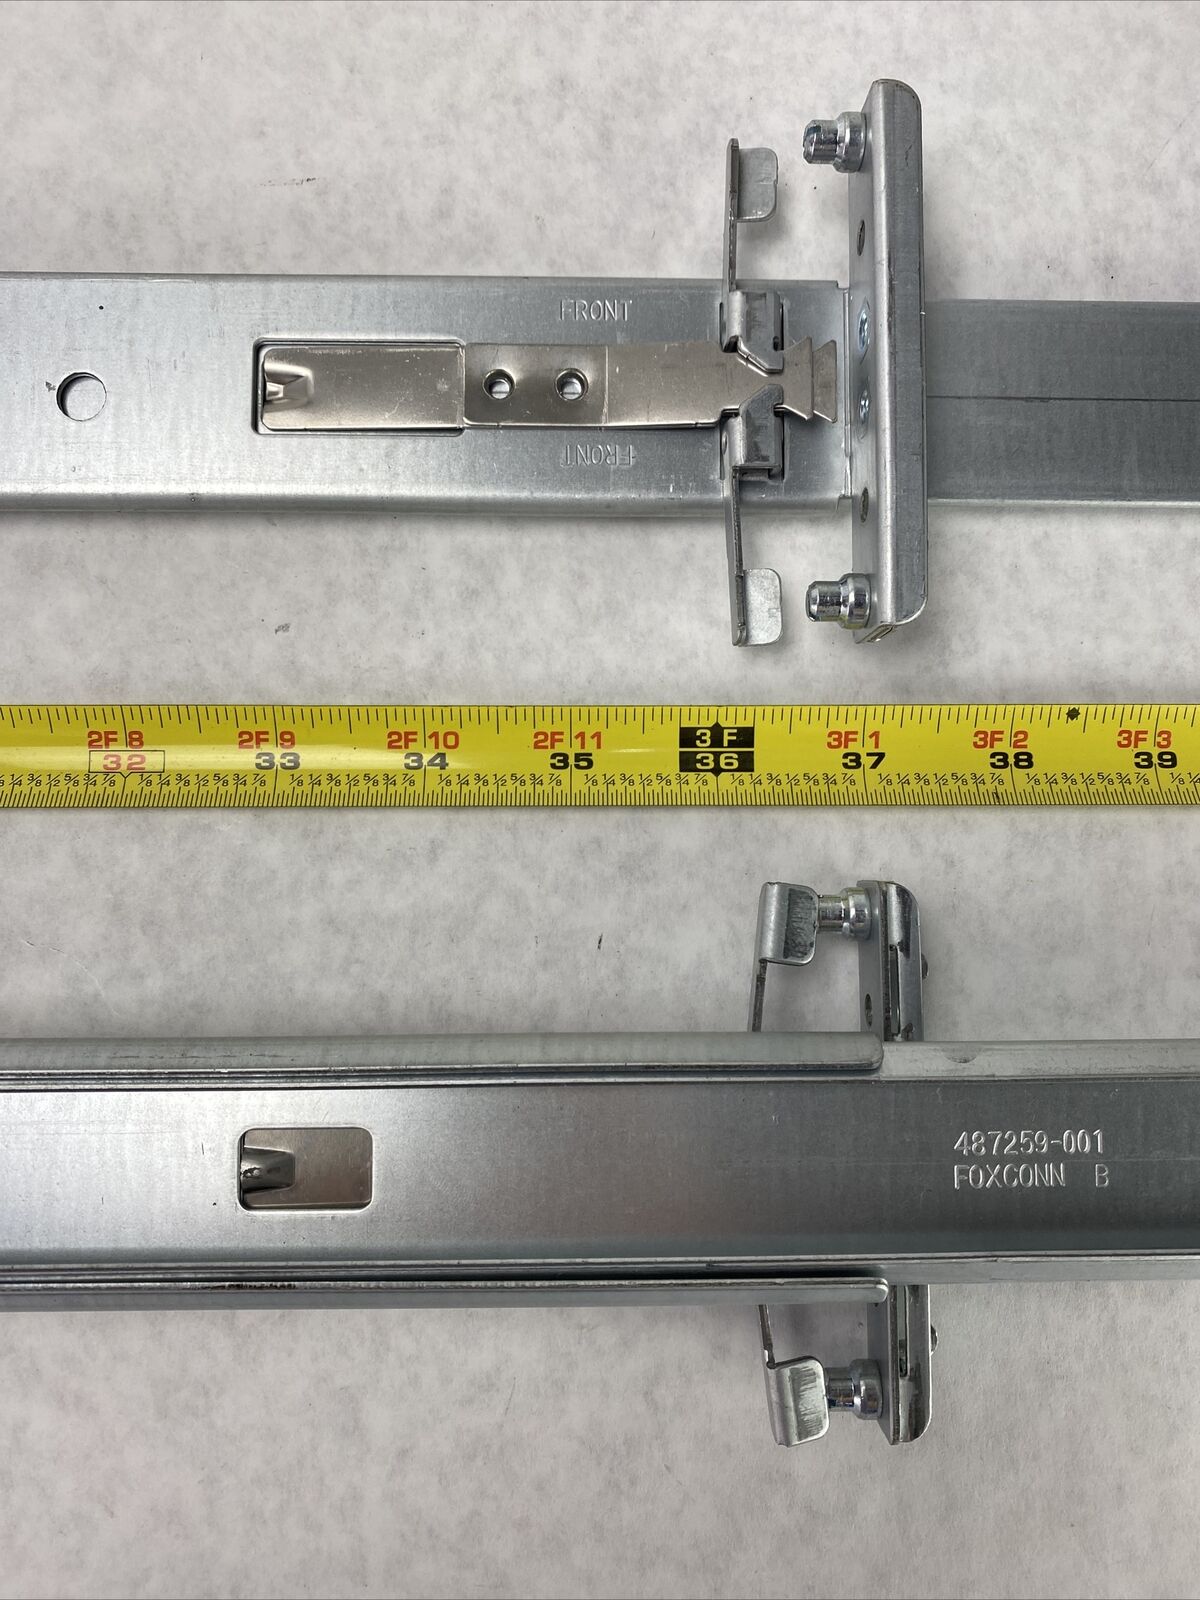 Lot( 2 ) Foxconn 487244-001 487250-001 487259-001 Rails 23 to 37 inches